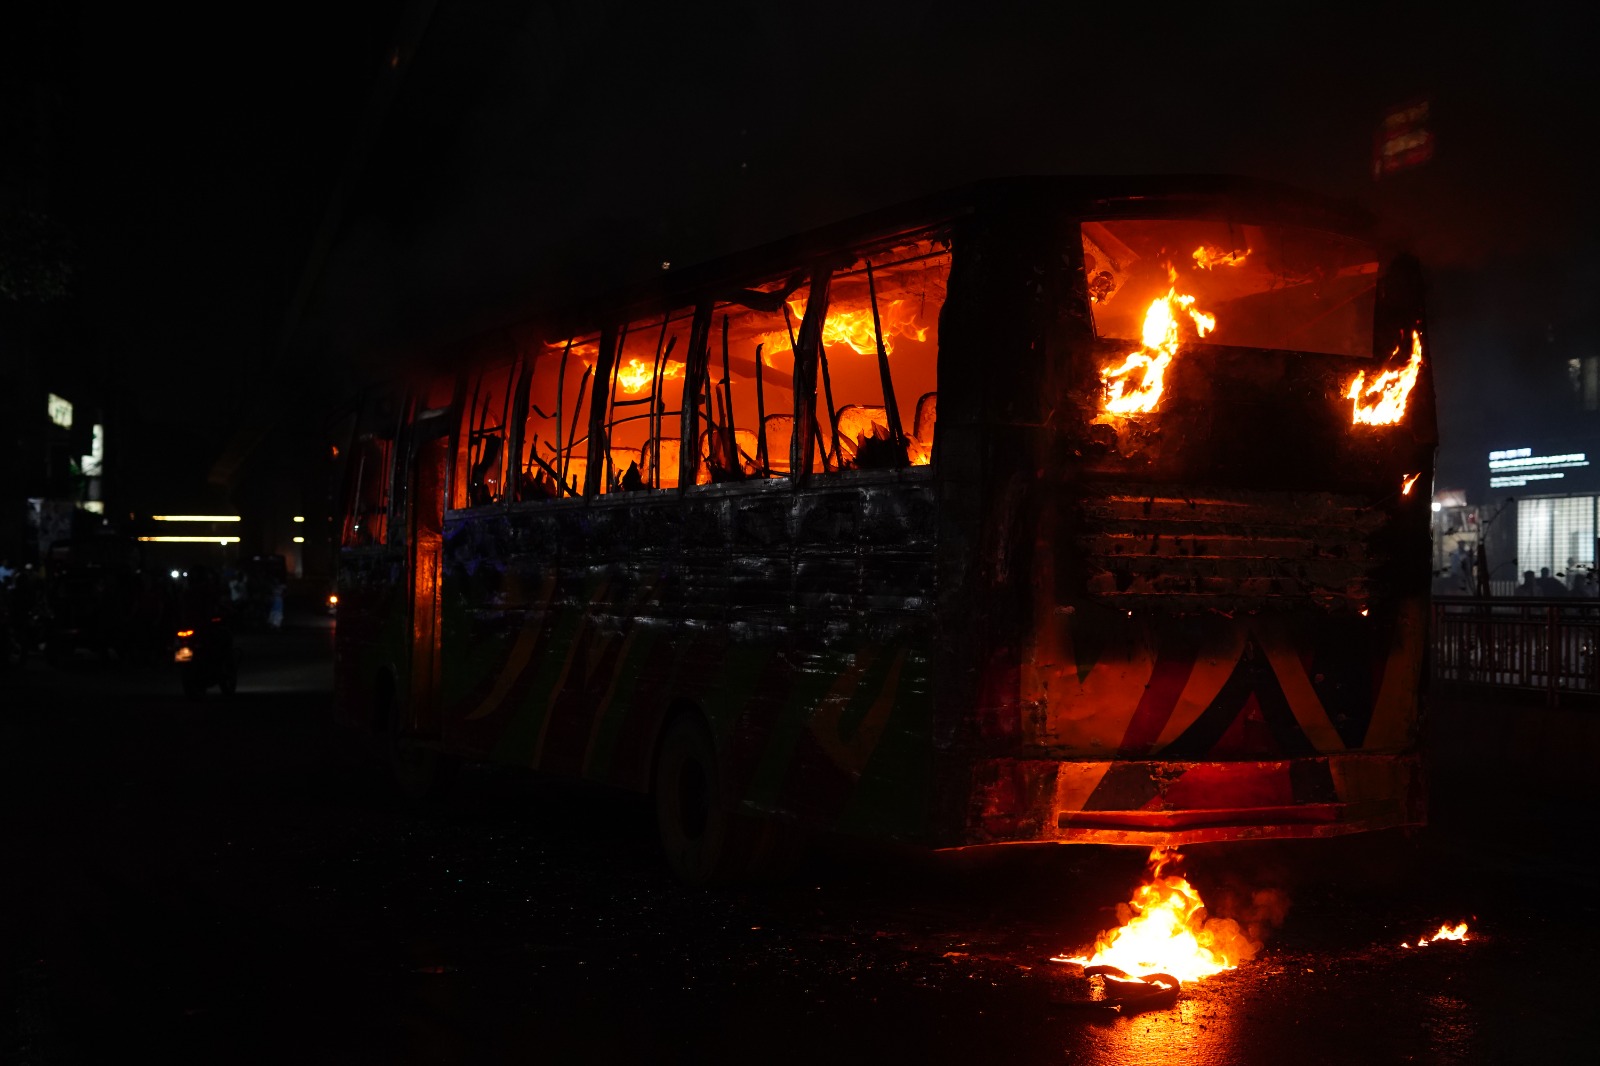 Countrywide blockade: Violence, arson attack, clashes marks 1st day of 48-hr blockade